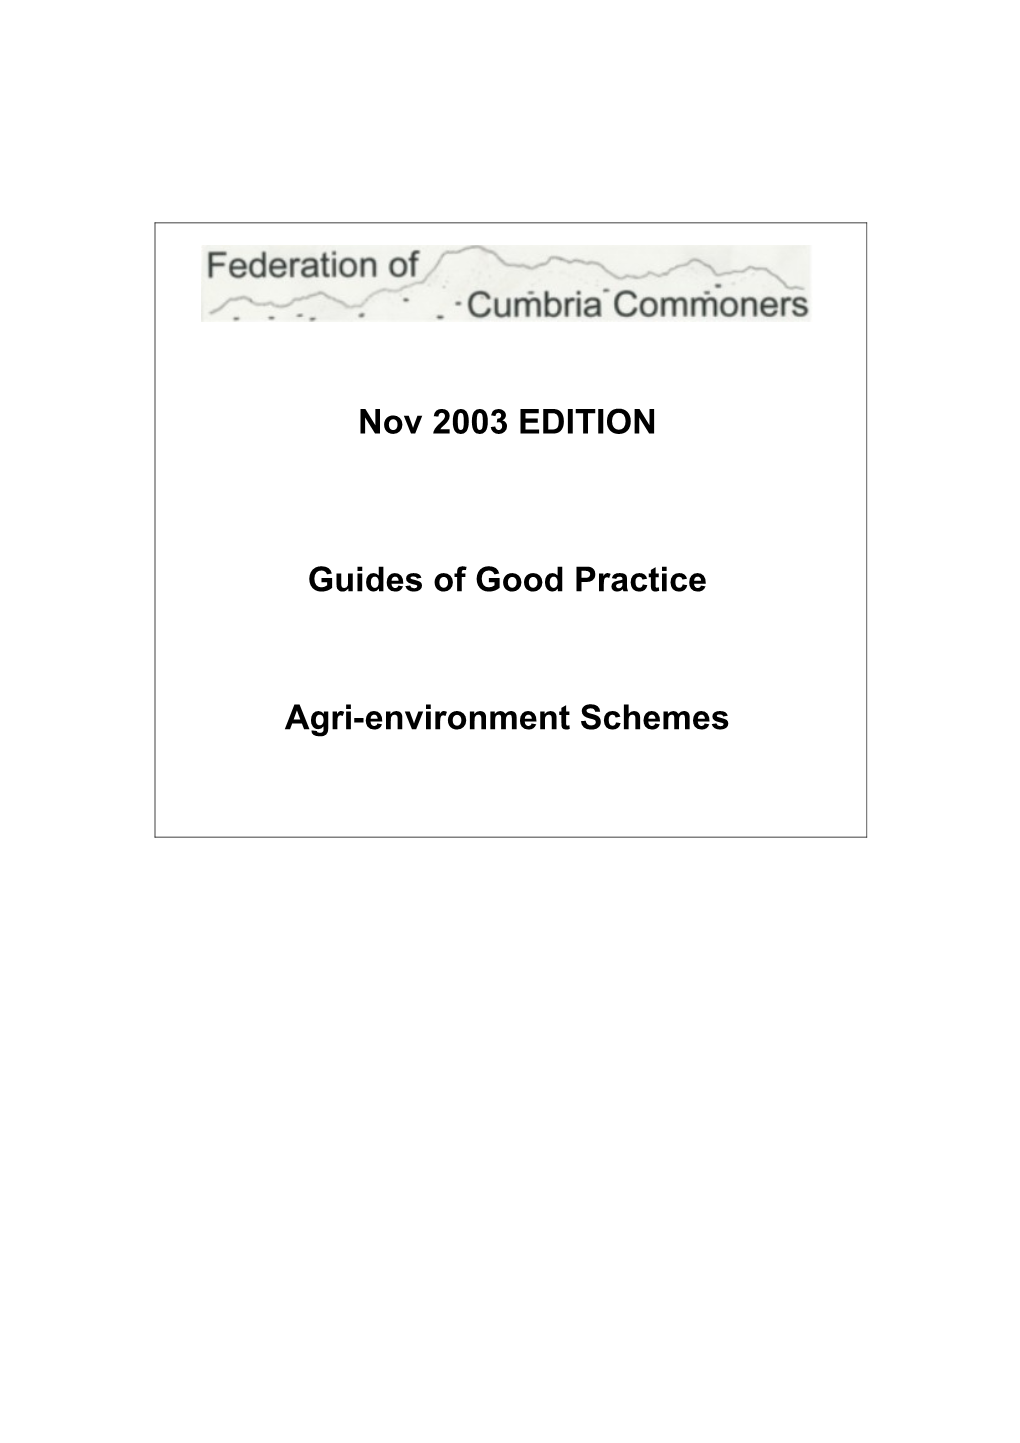 Guides of Good Practice